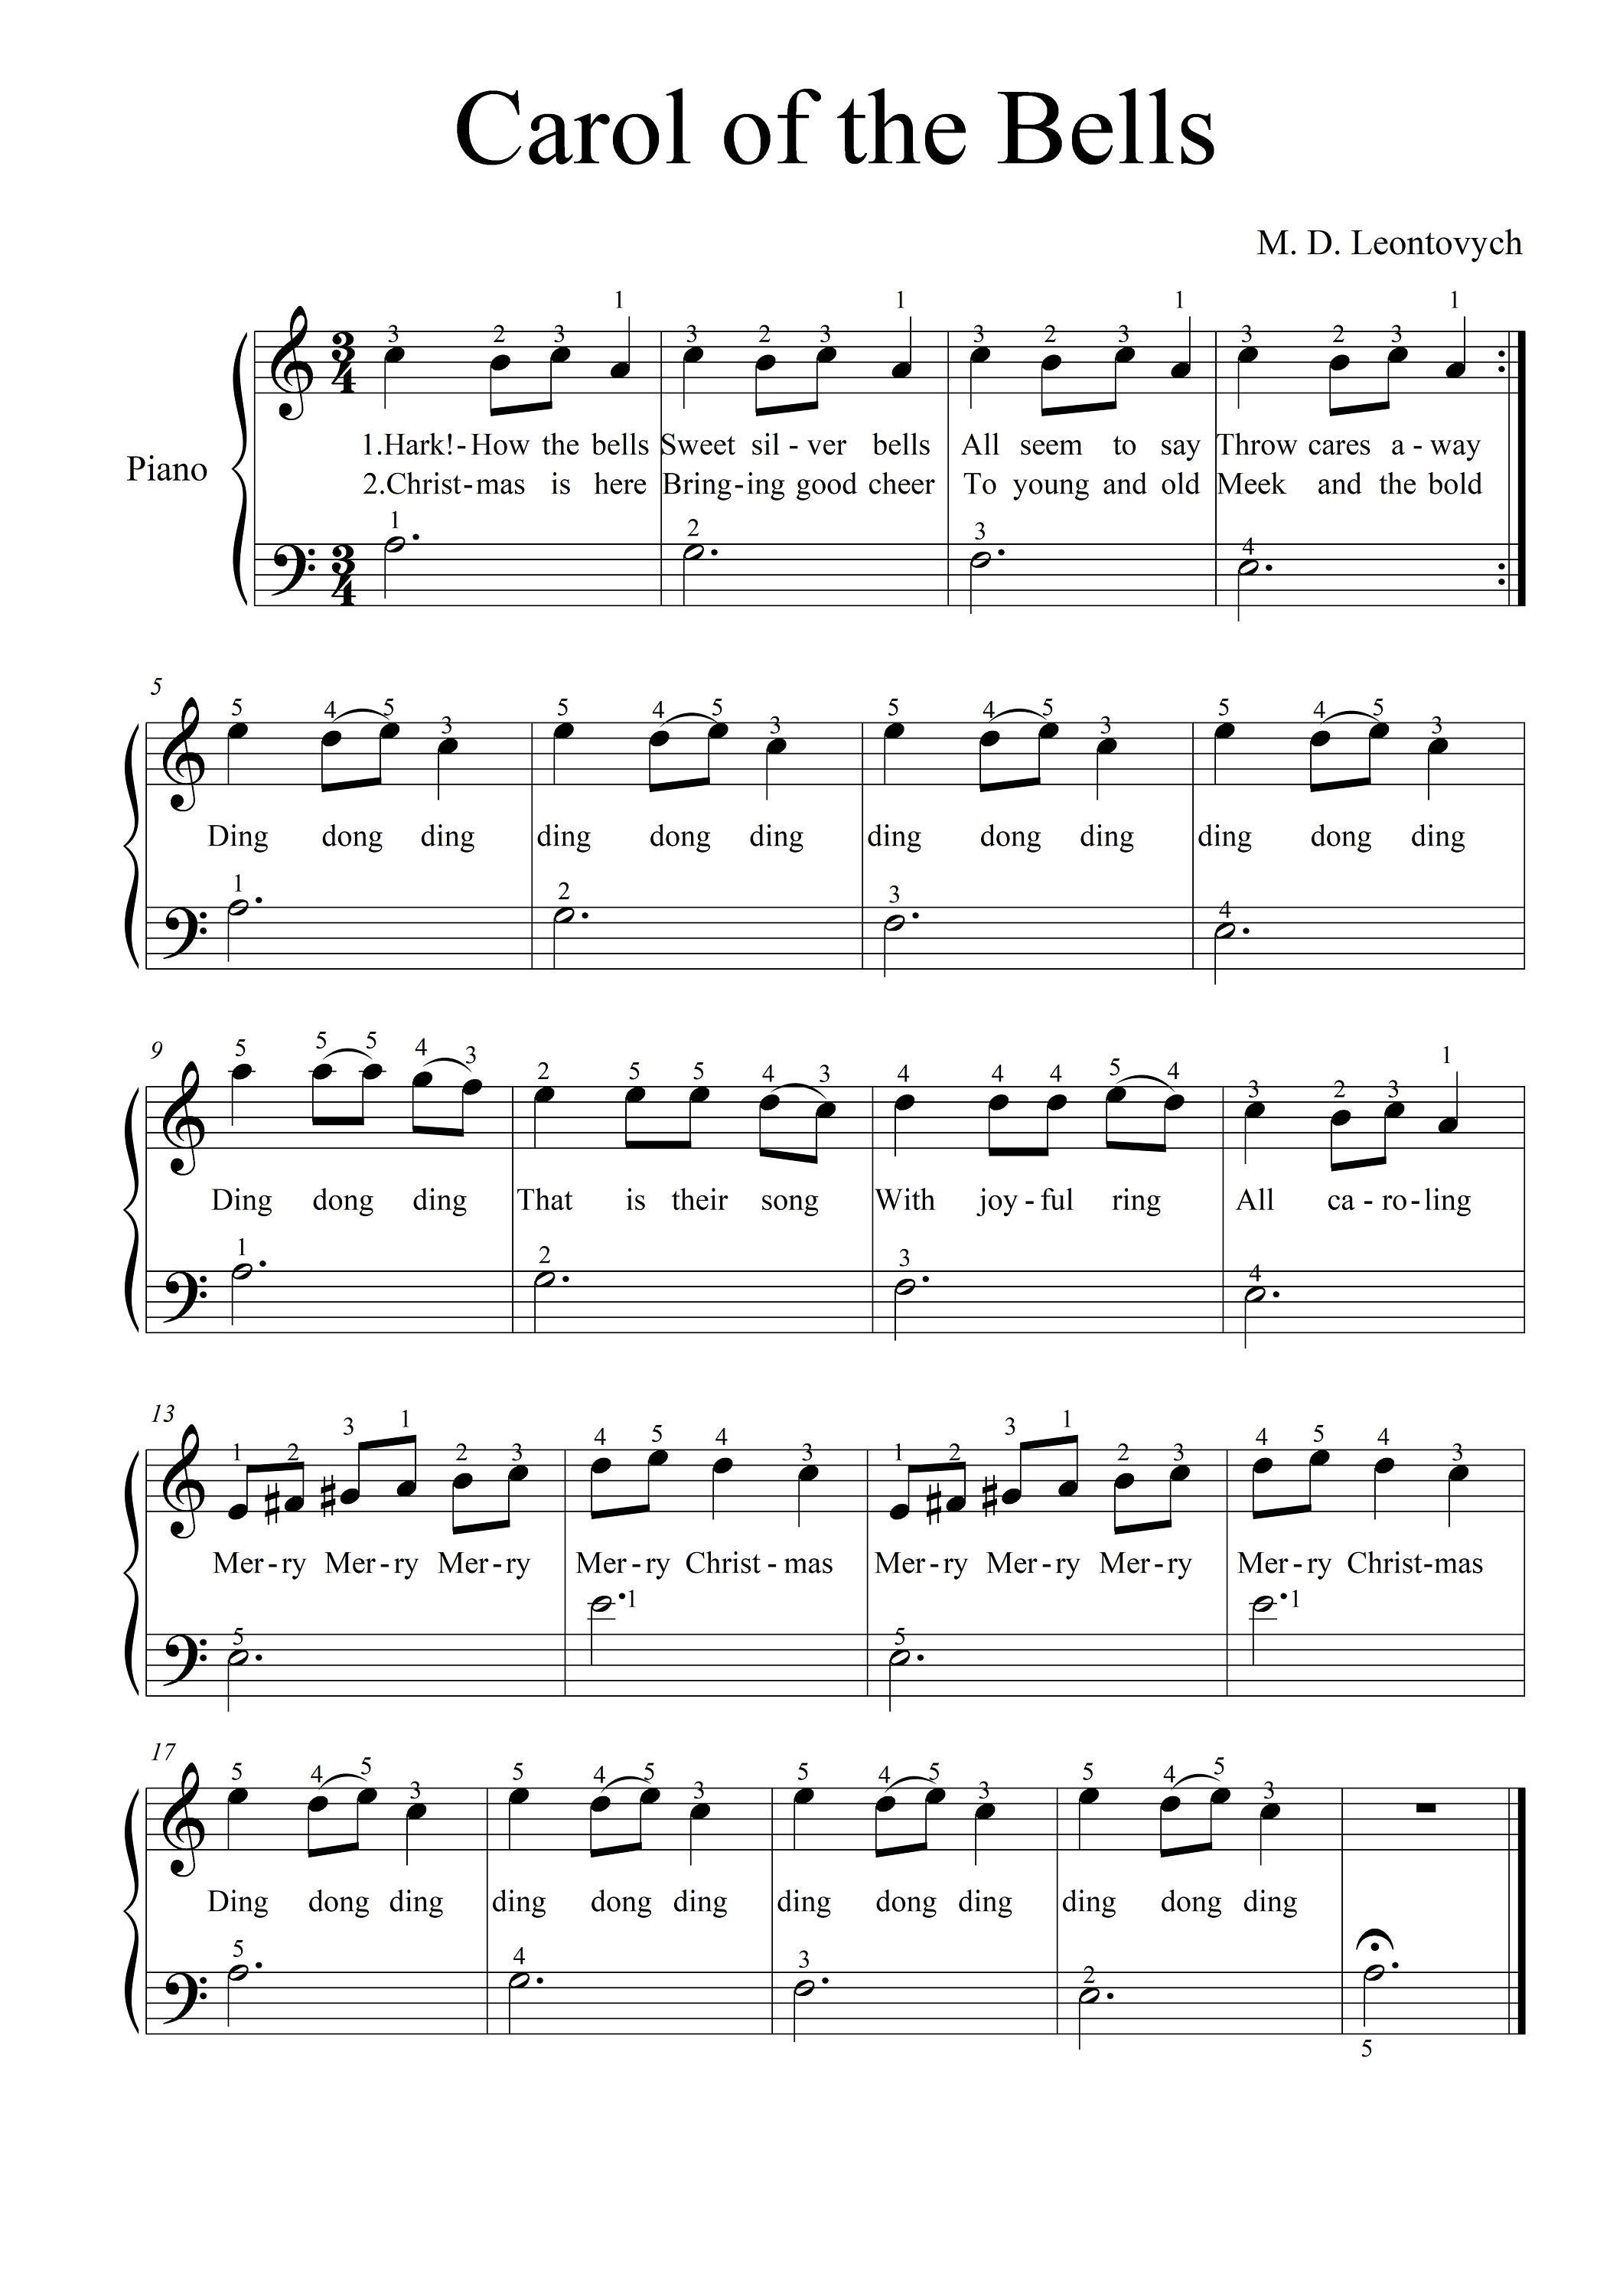 JINGLE BELLS letra Sheet music for Vocals (Solo)